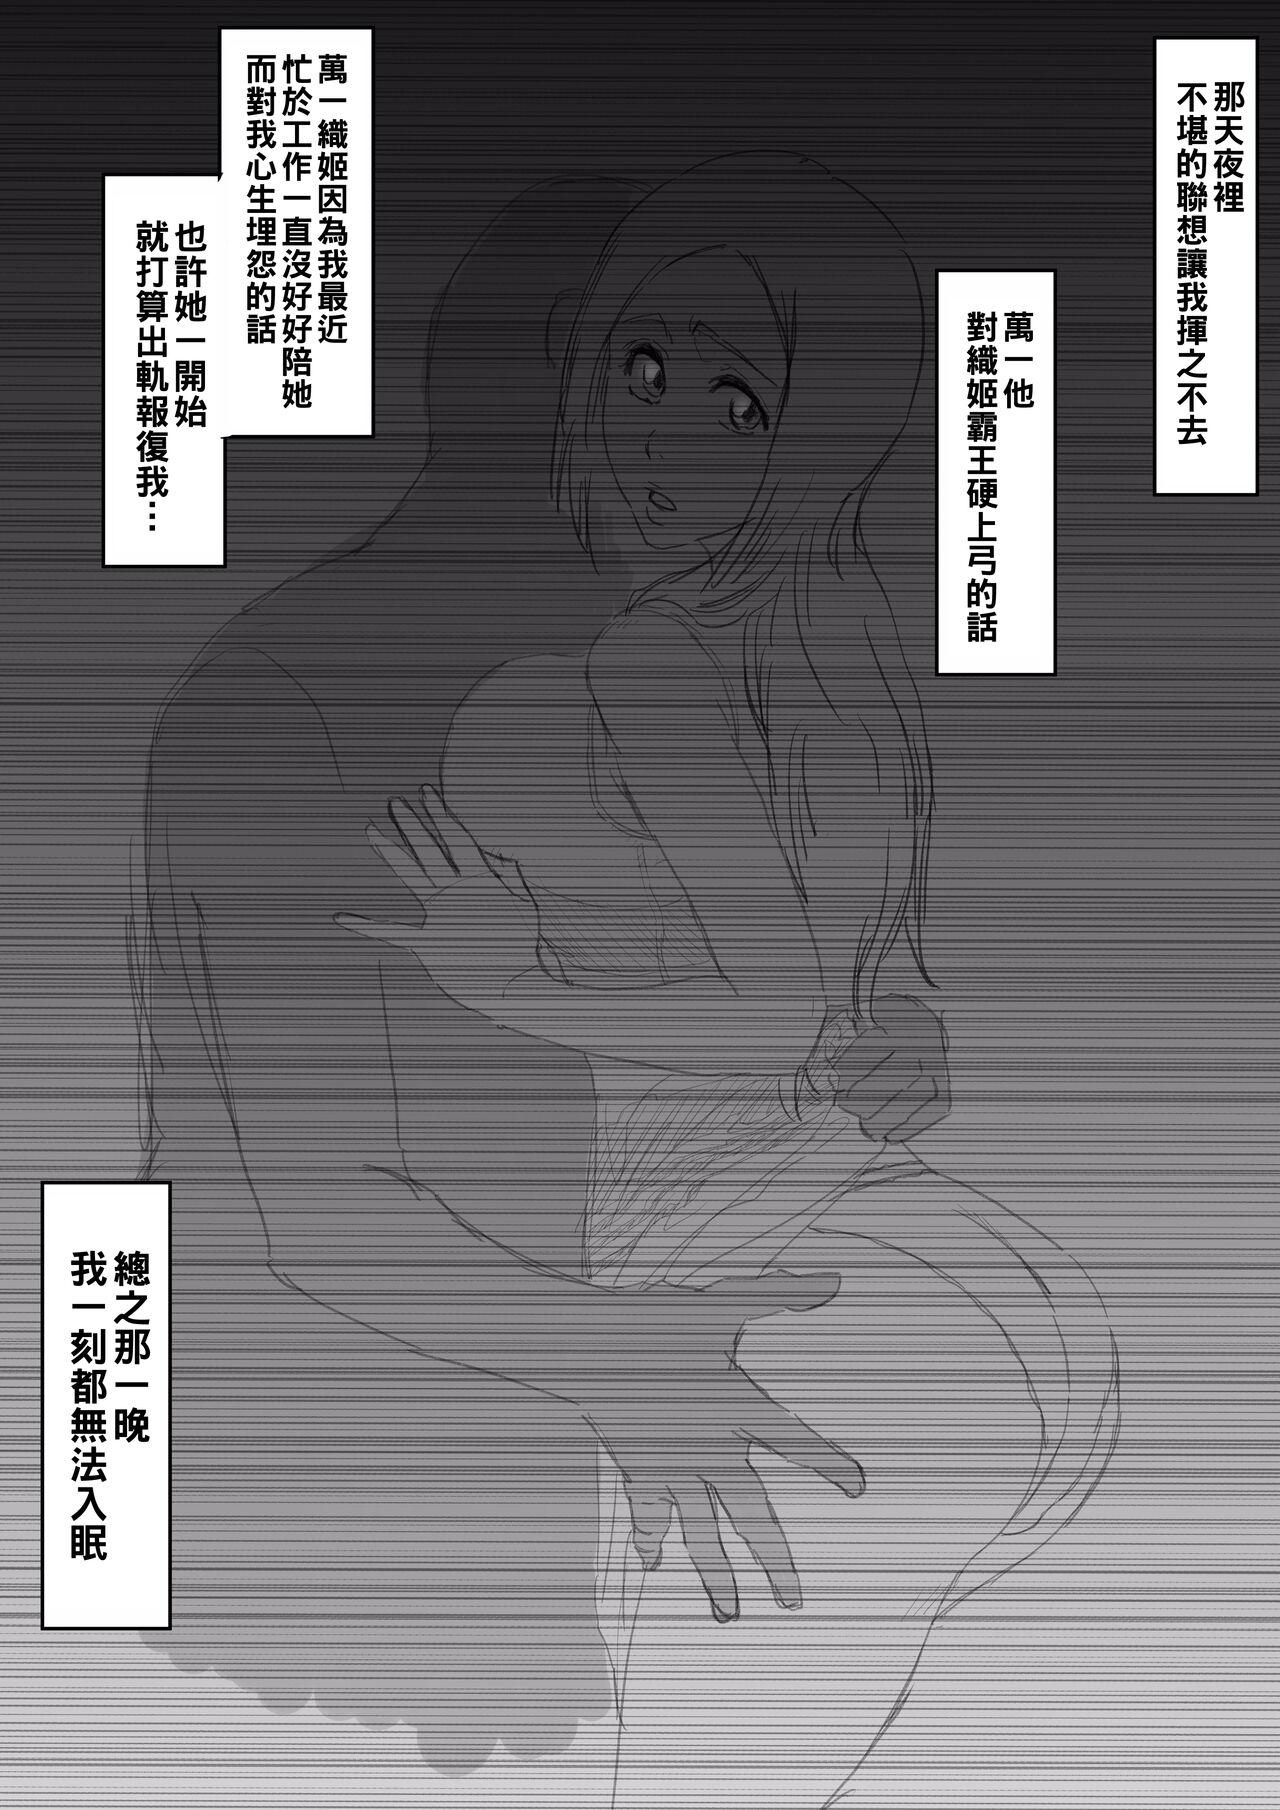 Asslicking [Iwao] 織姫寝取られ・・・？ とよくあるやつ (BLEACH)（Chinese） - Bleach Family - Page 2